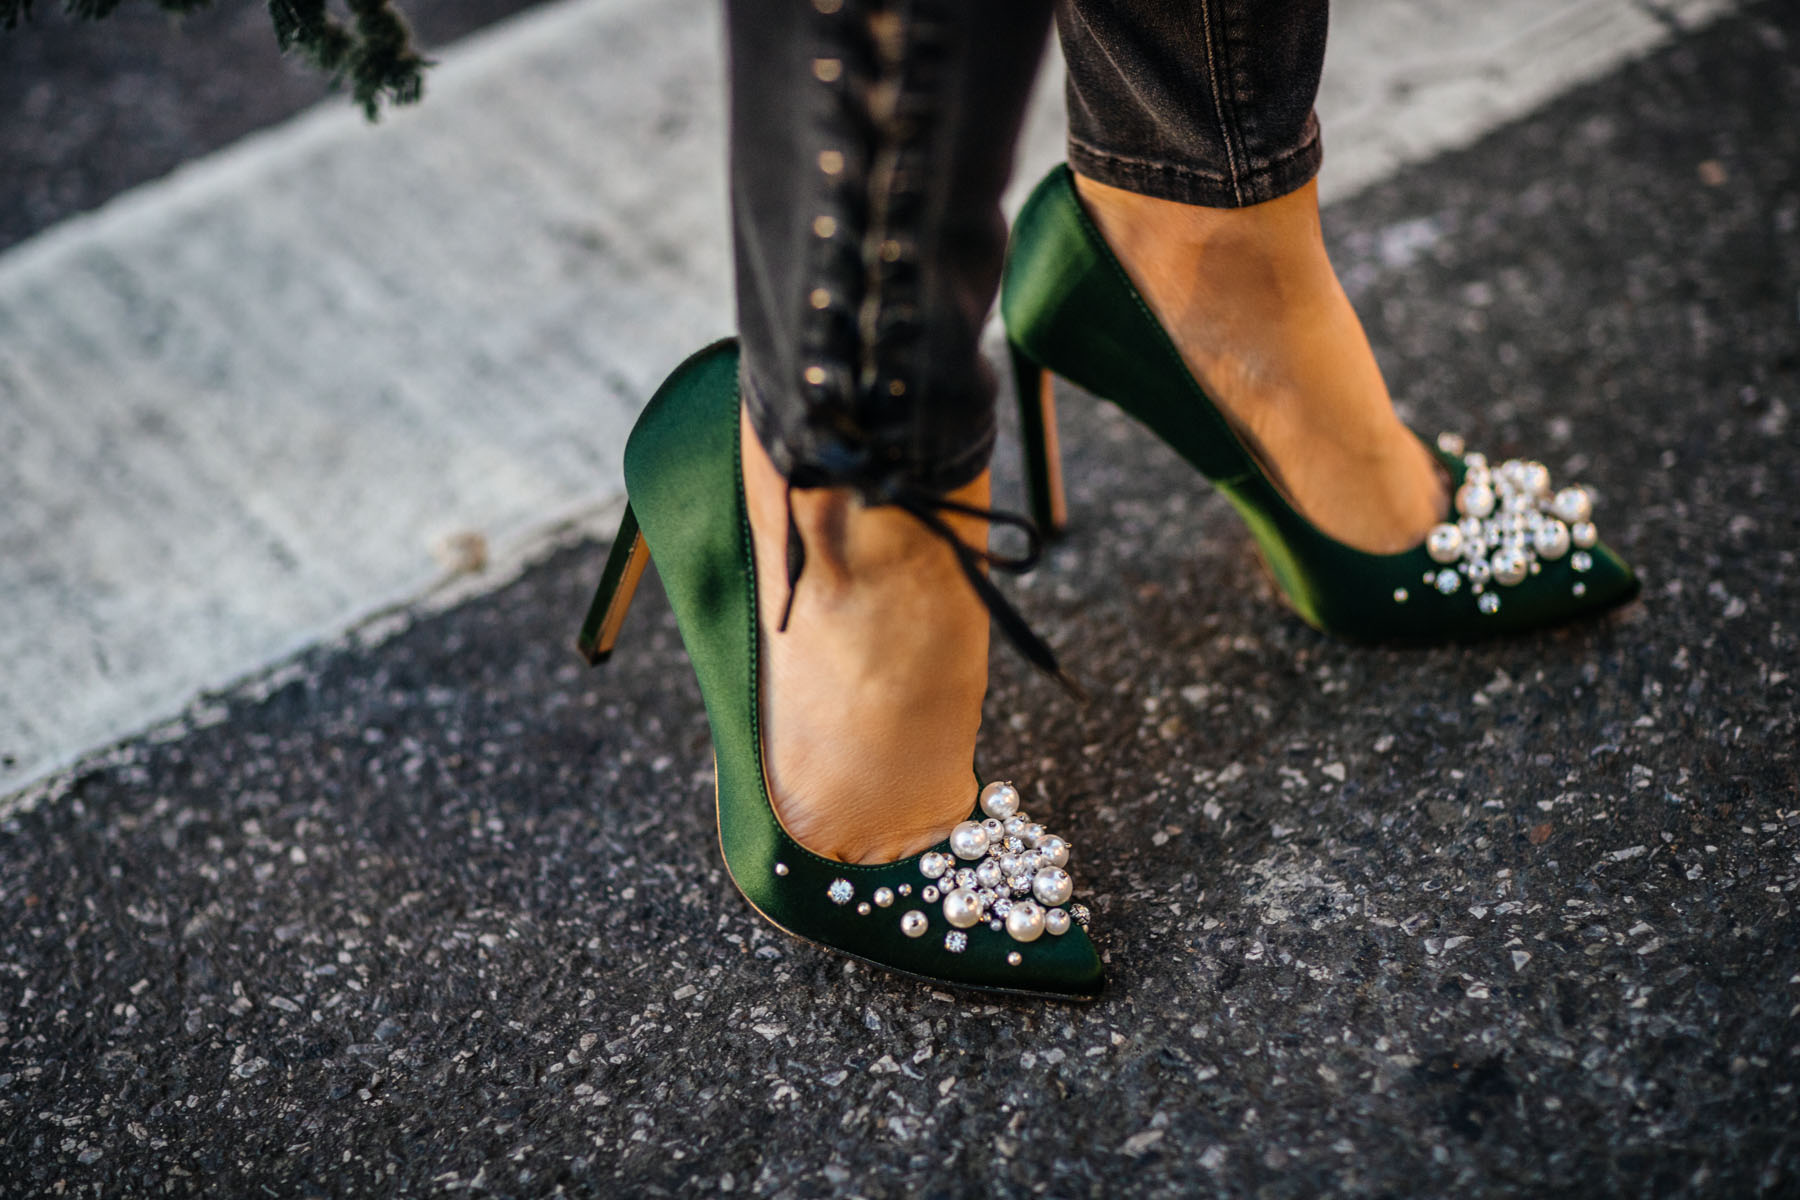 Fashion Details to Elevate Your Favorite Basics - green satin pumps, satin heels, embellished pumps // Notjessfashion // Jessica wang, winter outfits, stylish winter outfit, fashion blogger, street style, winter street style, green satin pumps, nine west heels, fringe details, asian blogger, salar bag, green outfits, shoe trends